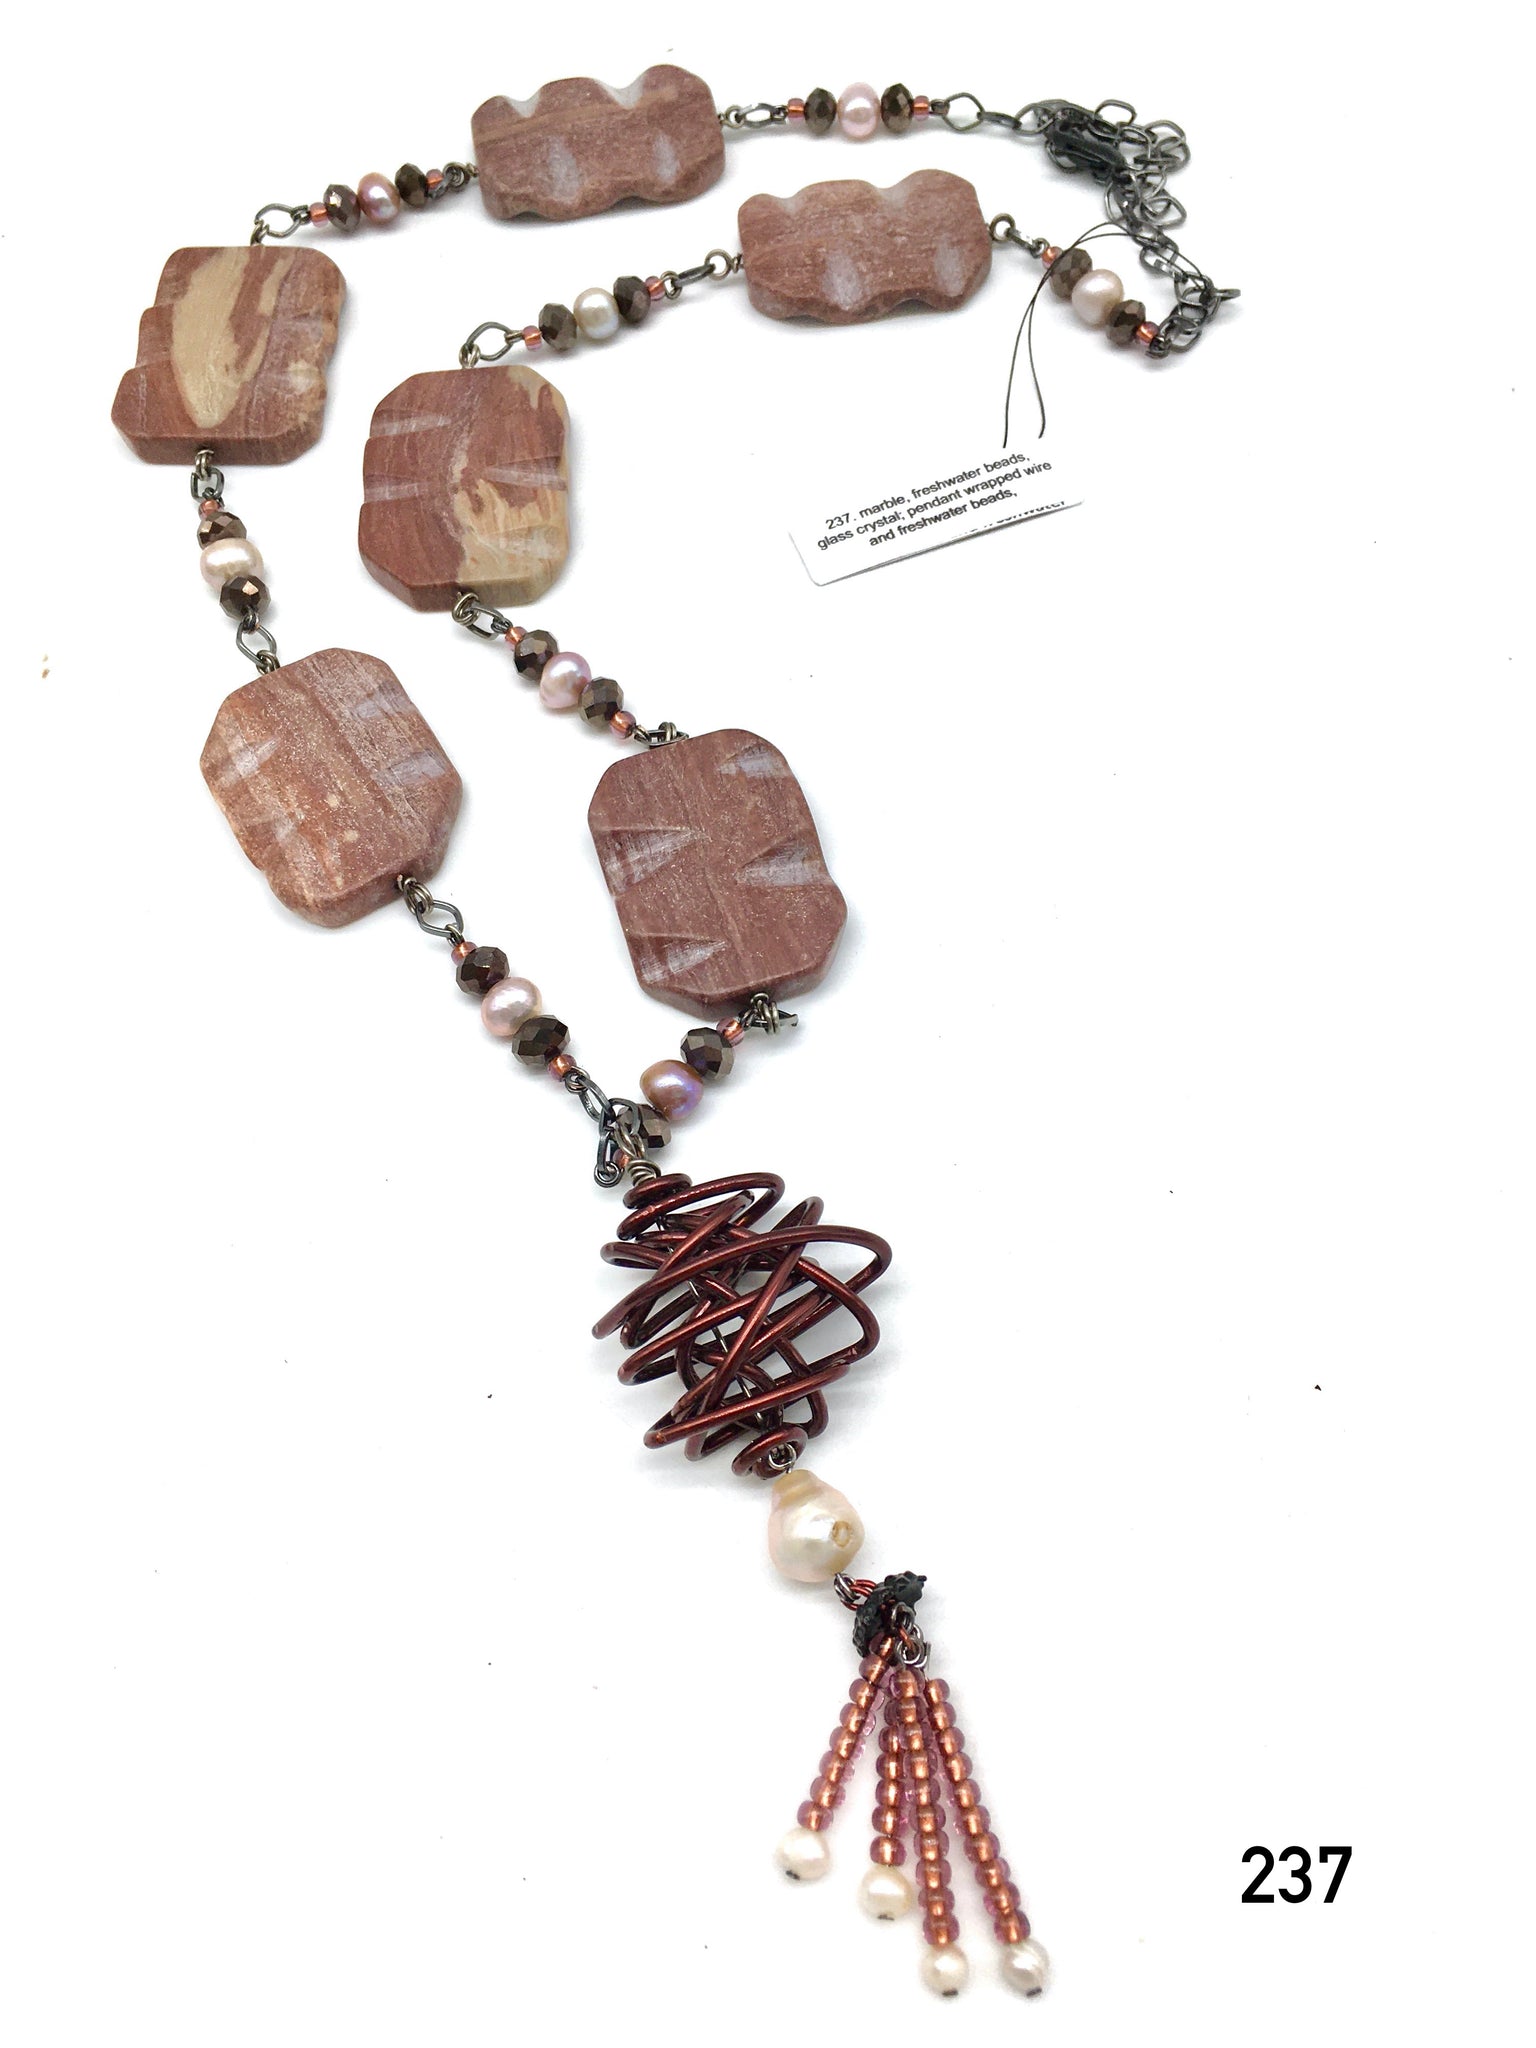 Marble, freshwater beads, glass crystal; pendant wrapped wire and freshwater beads,